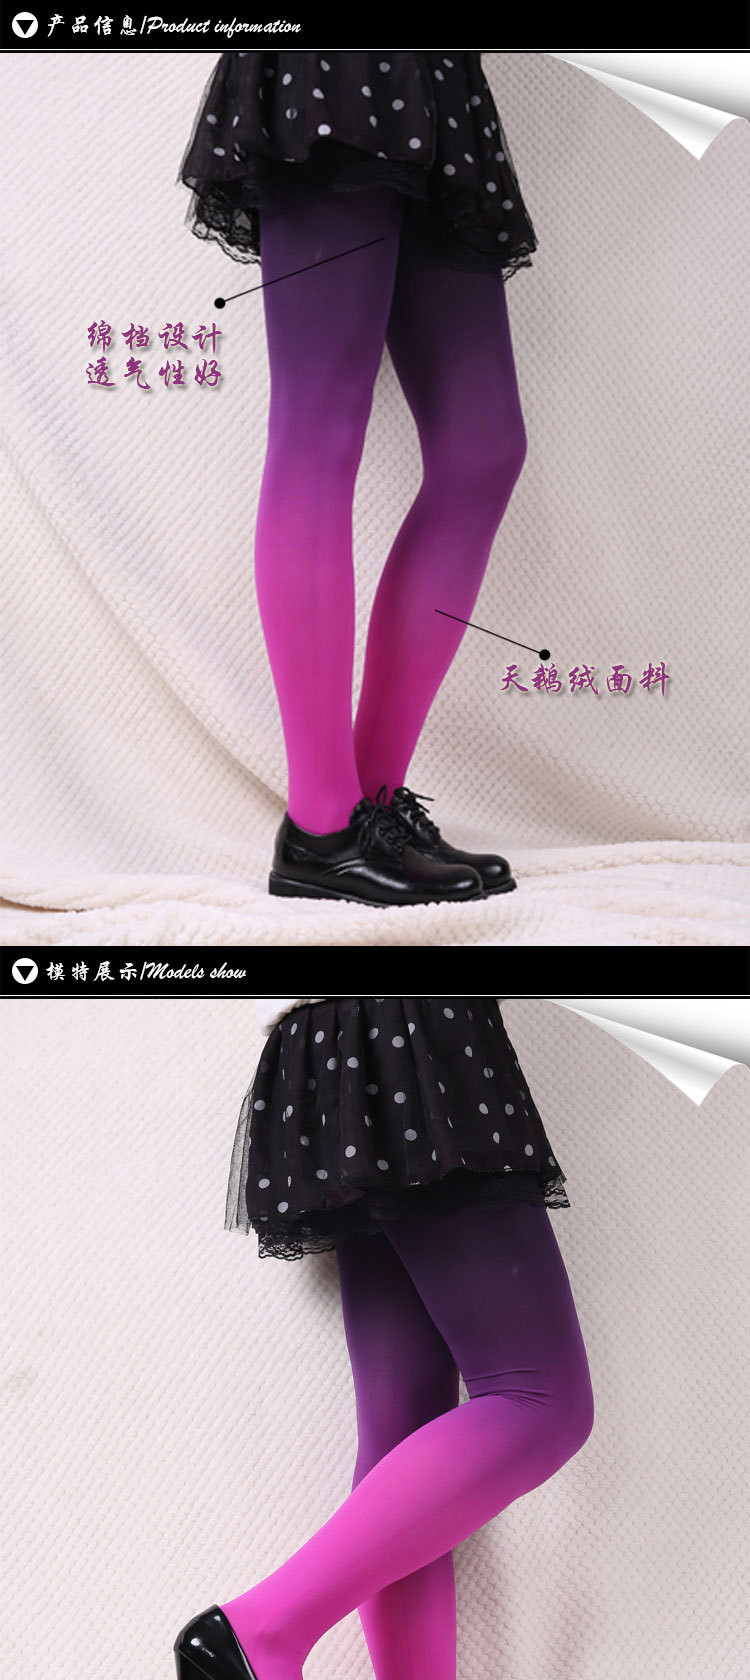 New Listing Women Slim Velet Sexy High Elastic Pantyhose High Quality Candy Color Stockings Pantyhose Hot Sale_1